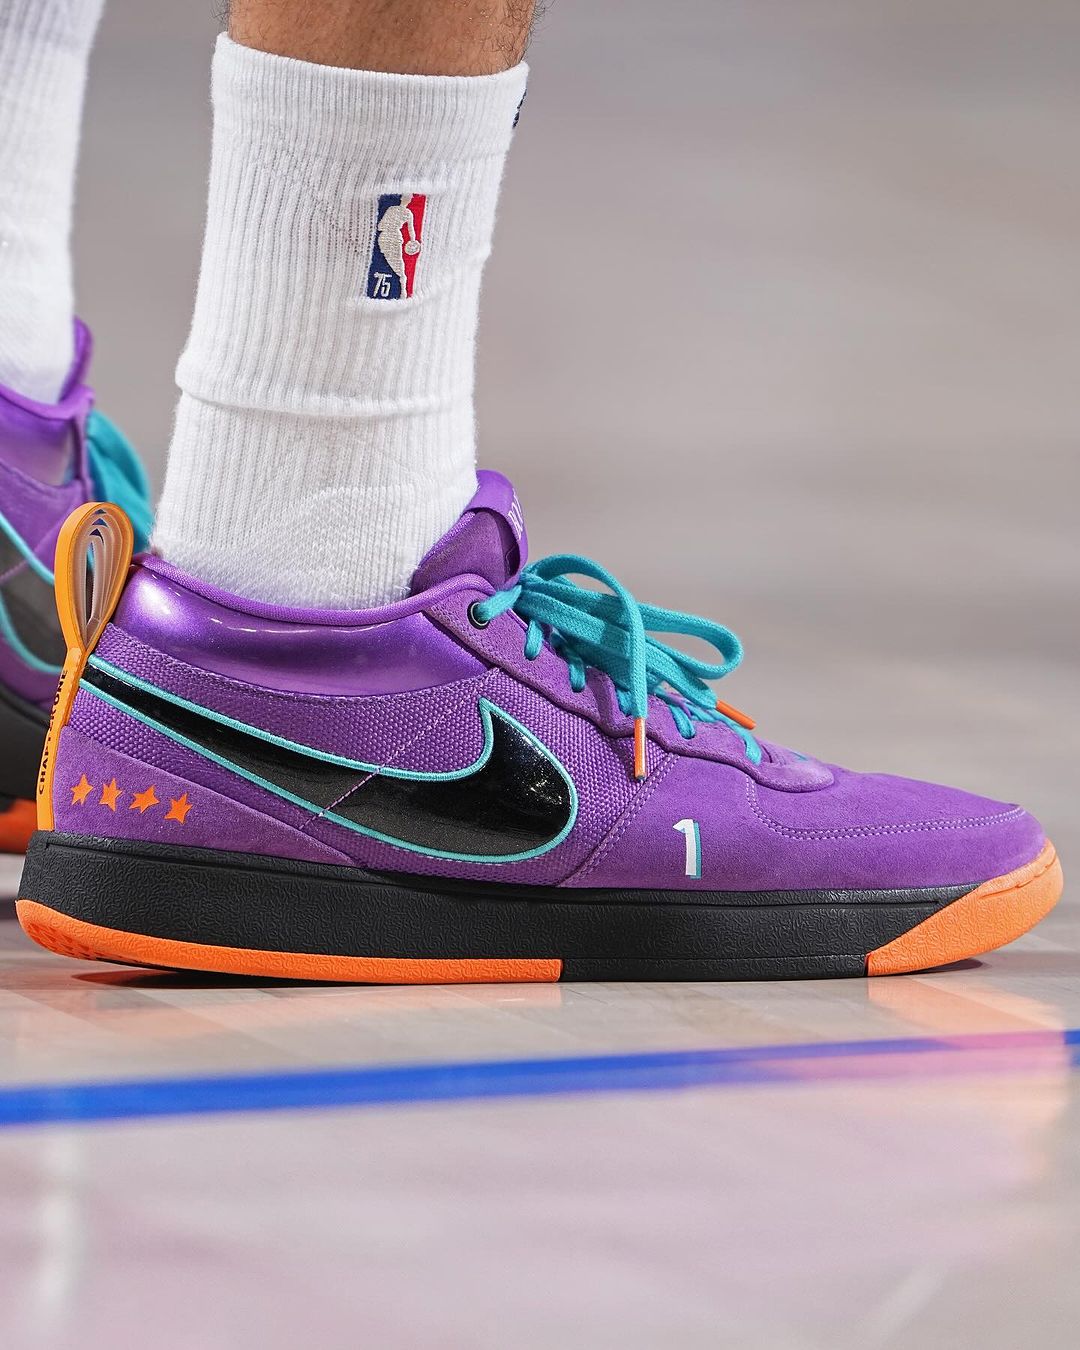 Devin Booker in the nike air force 1 sand springs water bill "1995 All-Star" PE (Image via Suns)